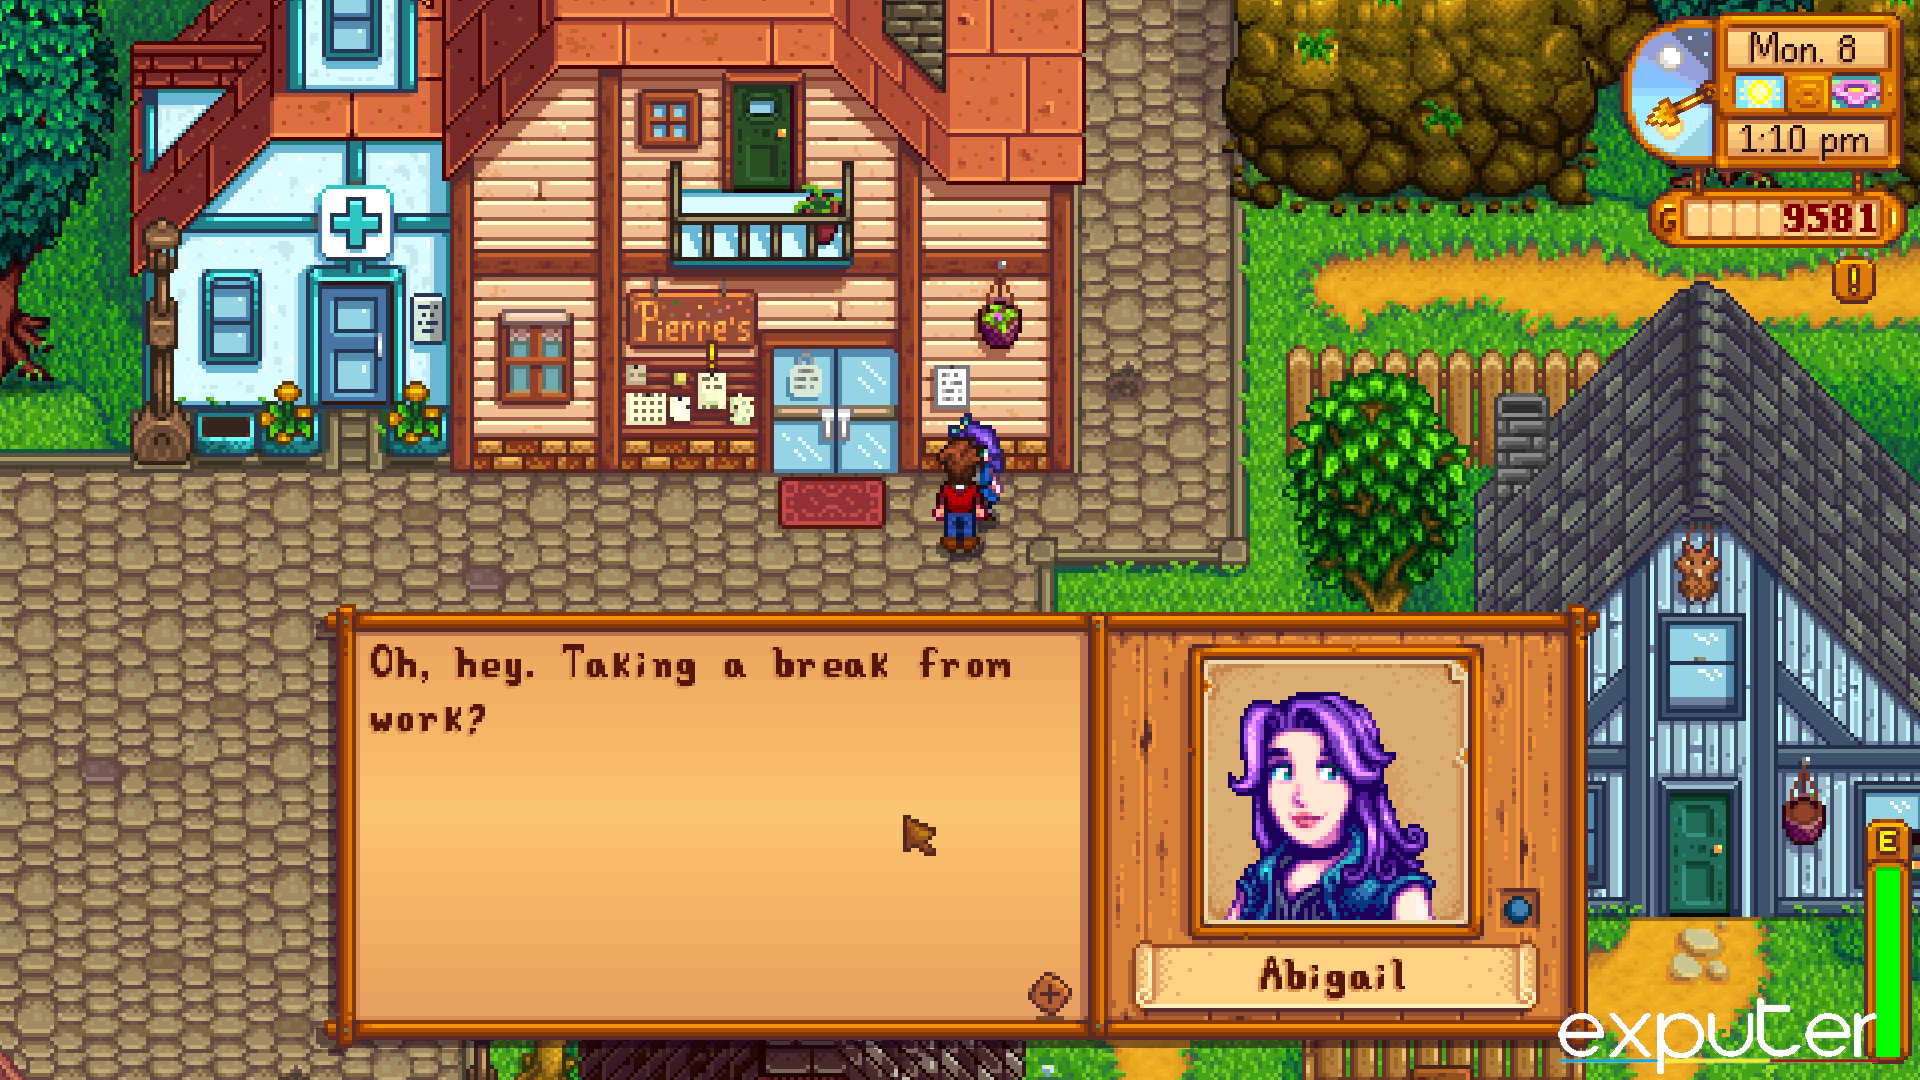 Stardew Valley Abigail's Dialogue and Personality